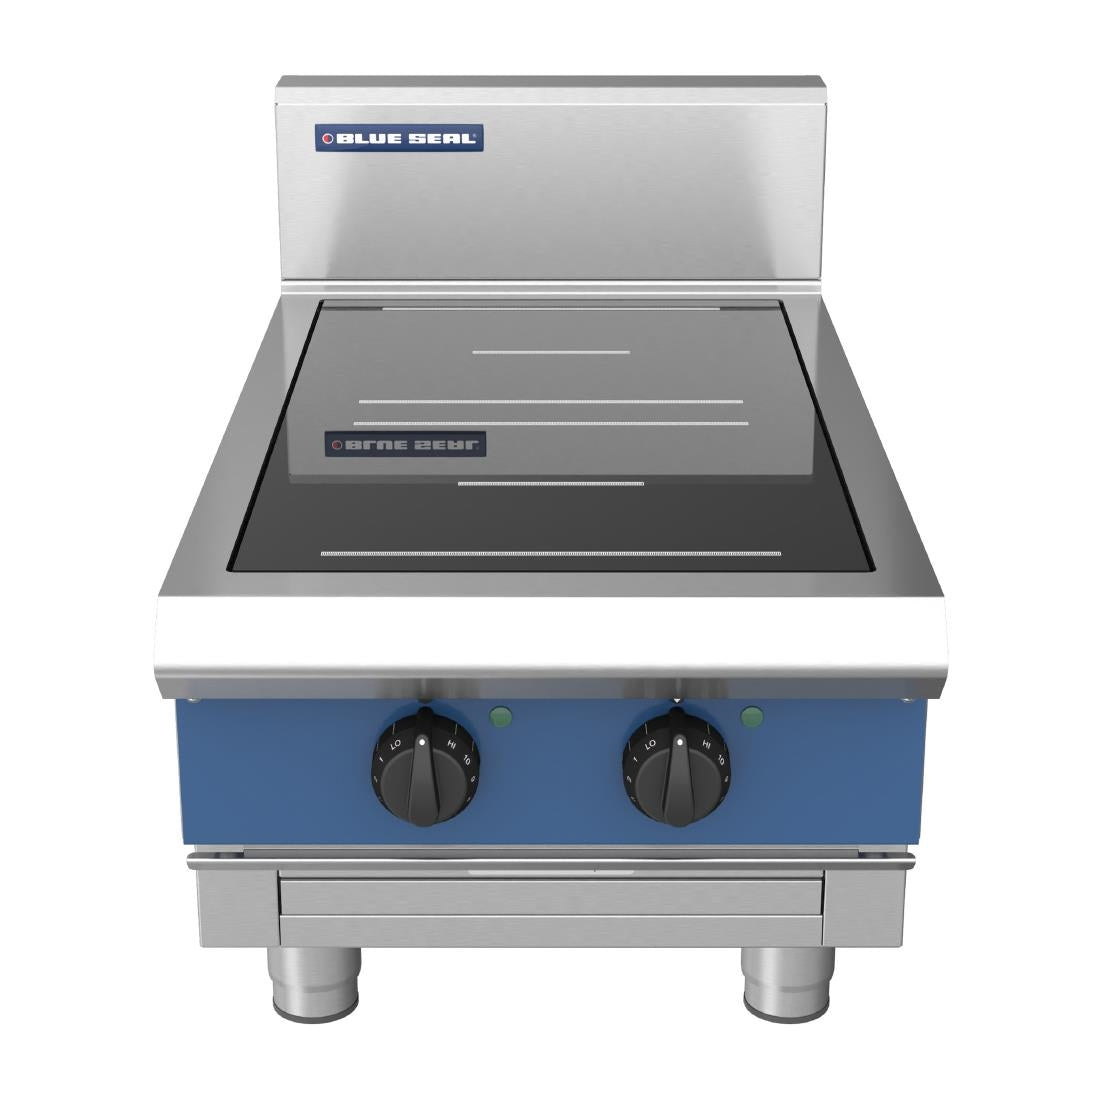 DX757 Blue Seal Dual Zone Countertop Induction Hob 10kW IN512R5-B JD Catering Equipment Solutions Ltd